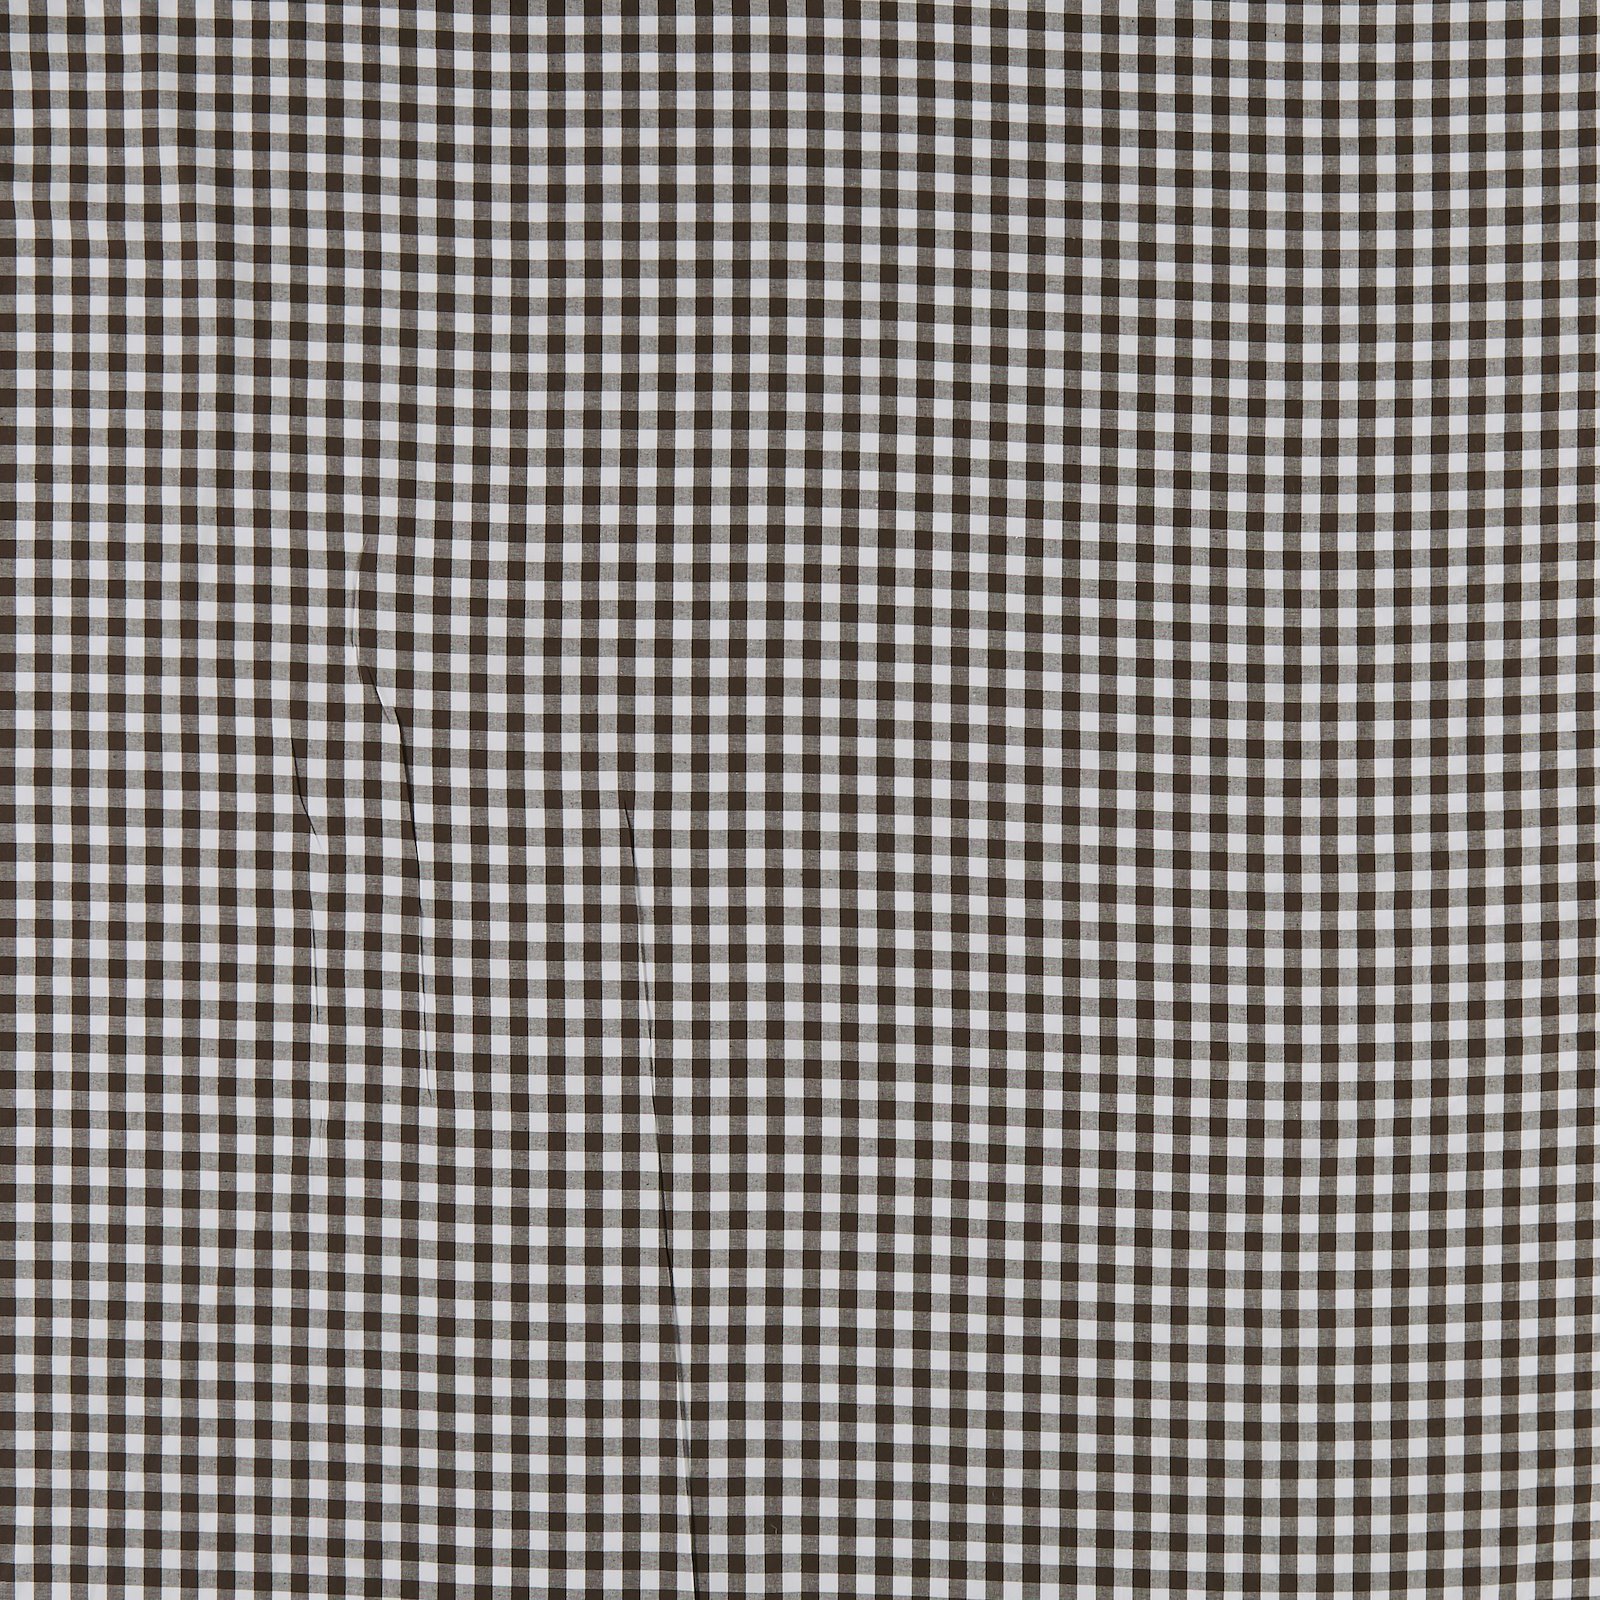 Cotton yarn dyed dark brown/white check 780890_pack_sp